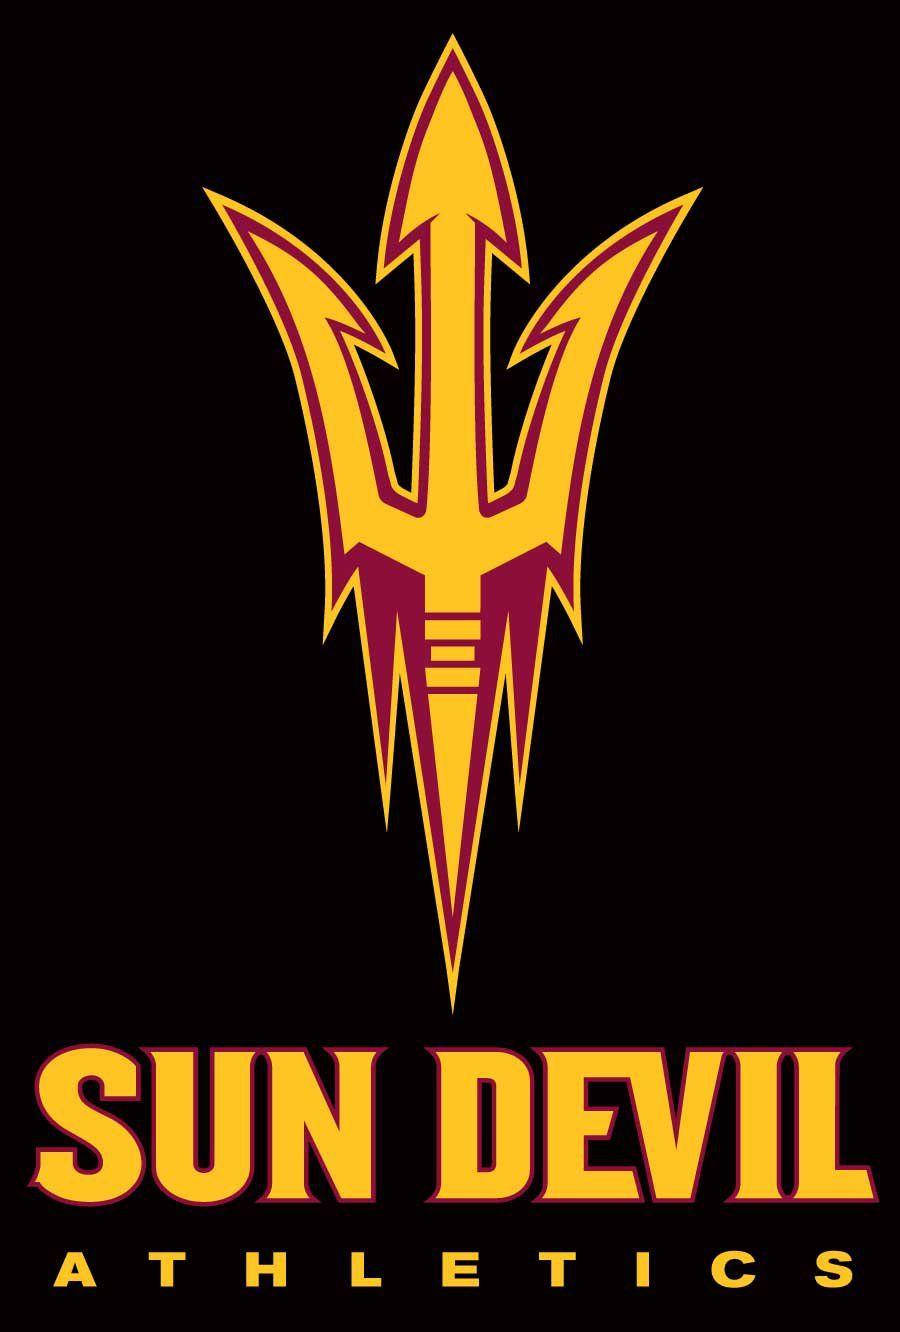 Solnegro Tridente Del Diablo Universidad Estatal De Arizona. (context: These Sentences Seem To Refer To A Computer Or Mobile Wallpaper With The Image Of A Black Sun And The Logo Or Emblem Of Arizona State University, Emphasizing Its Association With The Devil's Fork Or Trident Symbol.) Fondo de pantalla